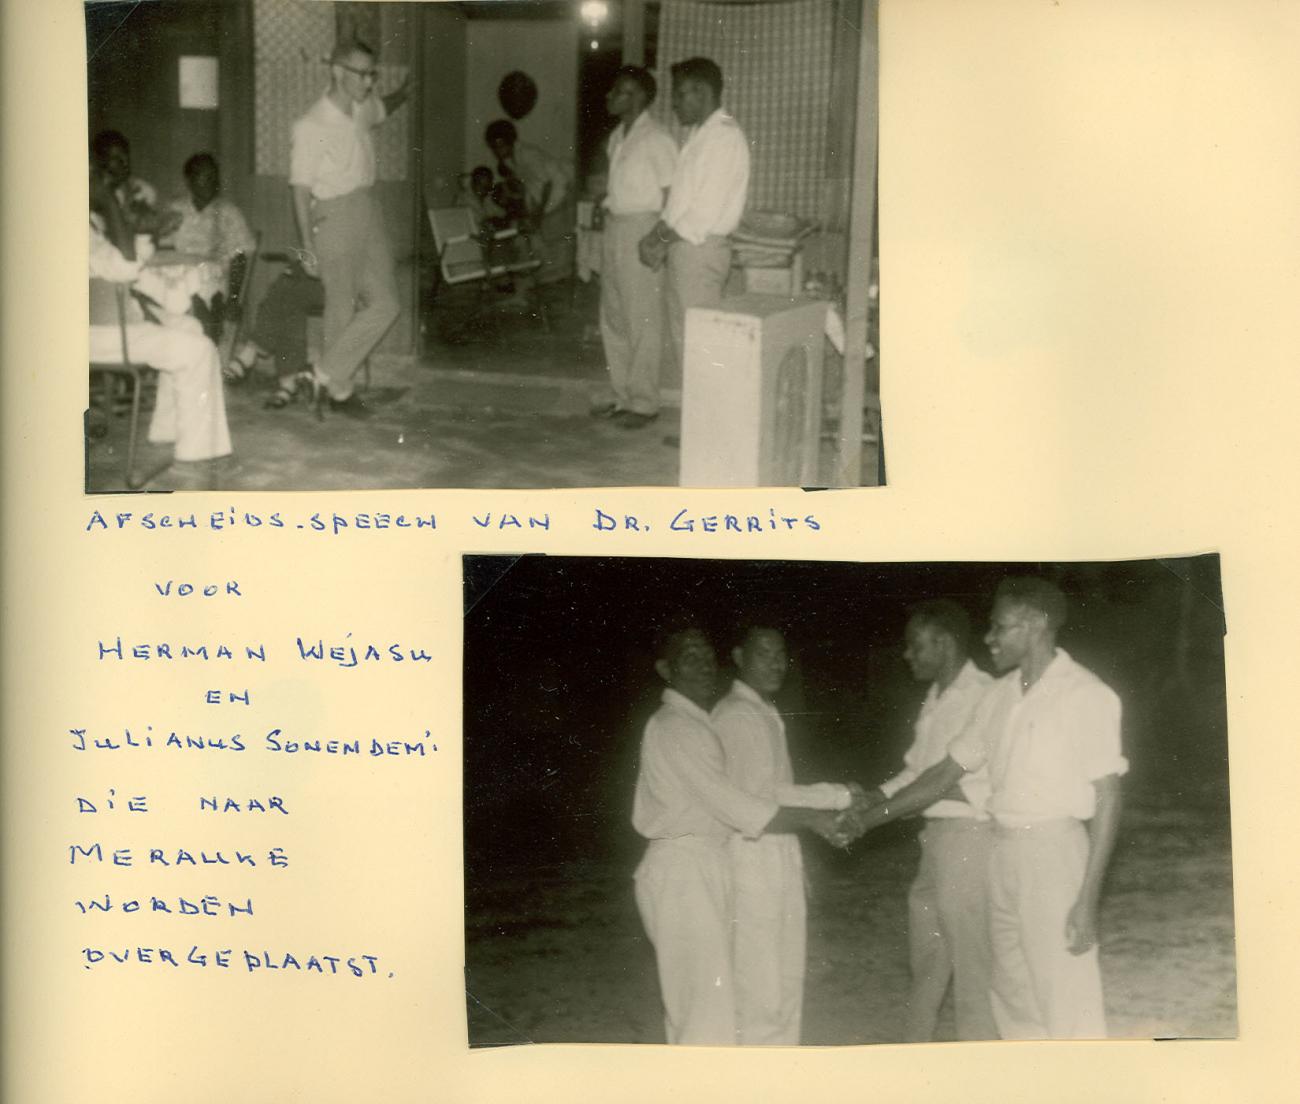 BD/83/91 - 
Farewell speech for two Papua employees of the hospital at their transfer to Merauke
